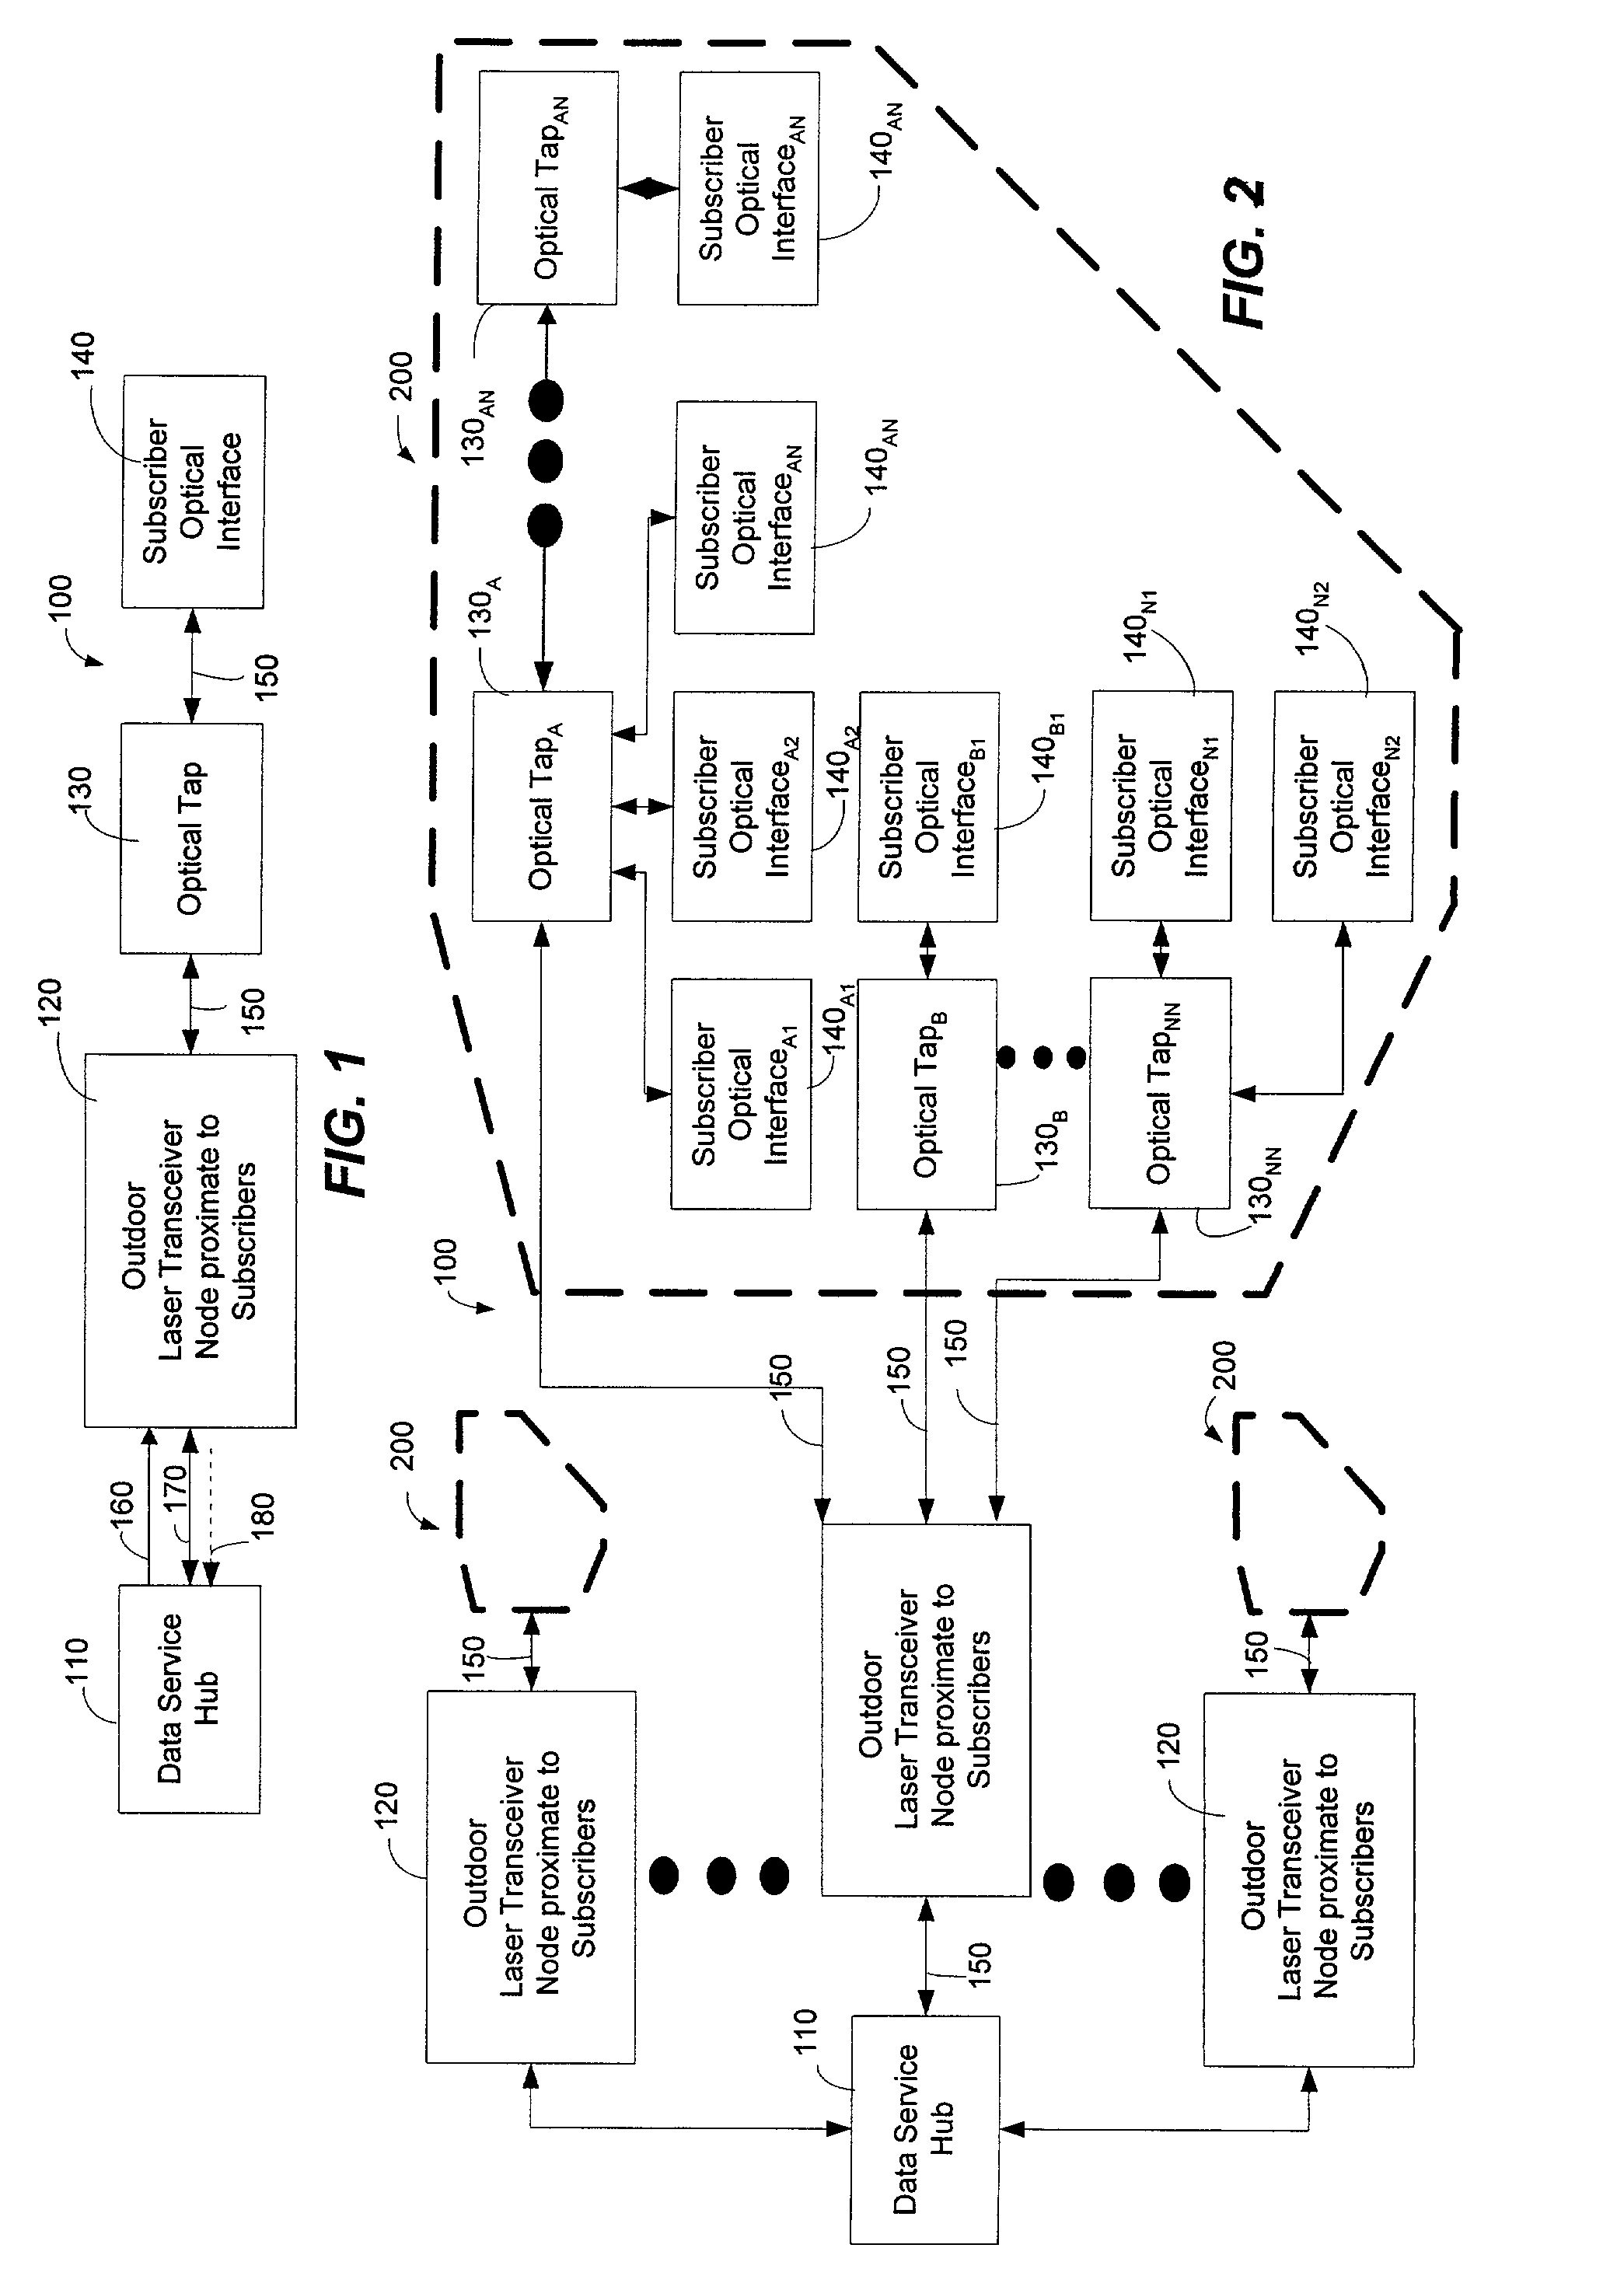 Method and system for processing upstream packets of an optical network